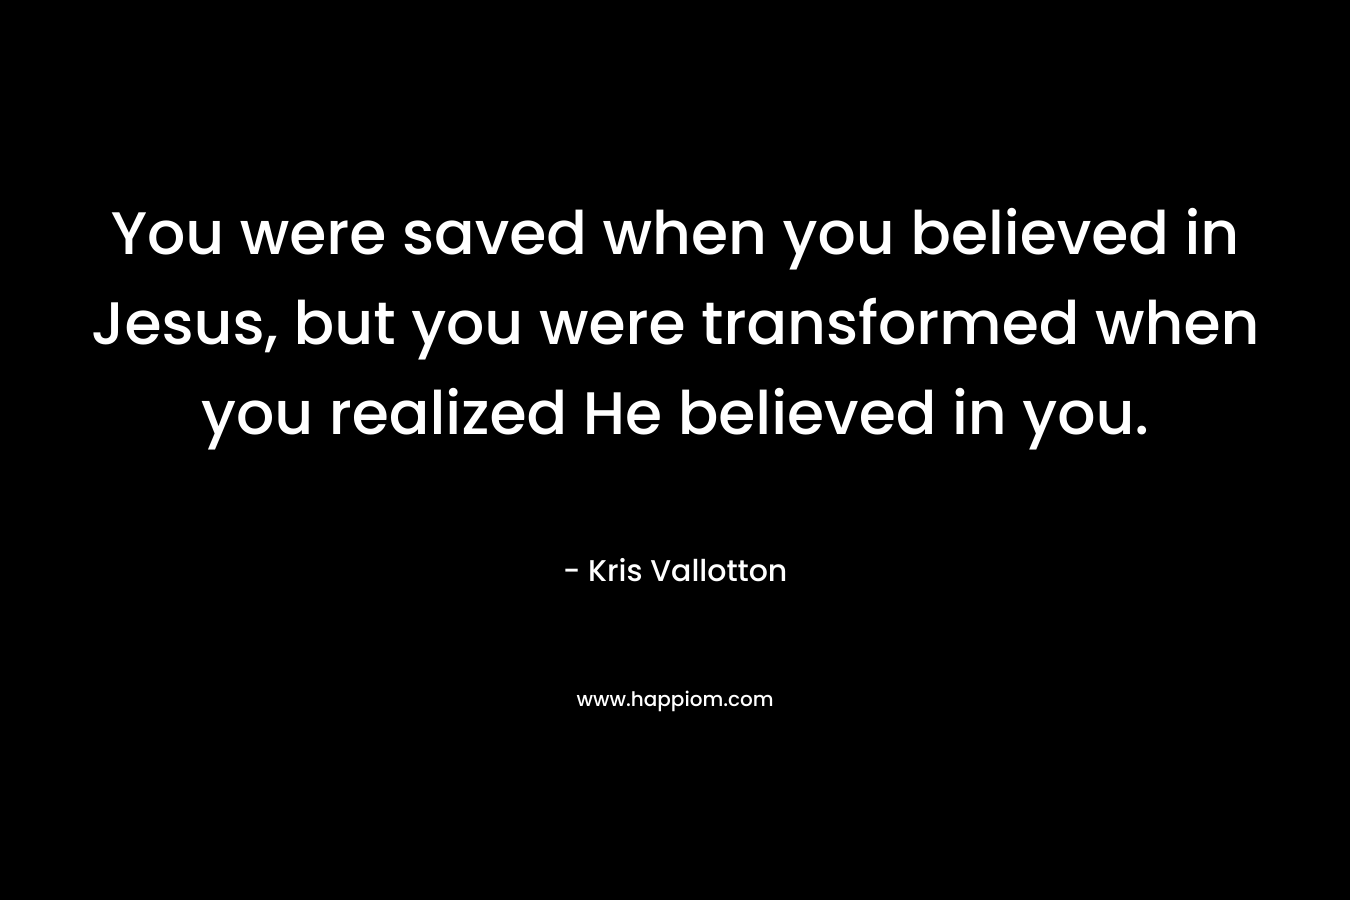 You were saved when you believed in Jesus, but you were transformed when you realized He believed in you. – Kris Vallotton